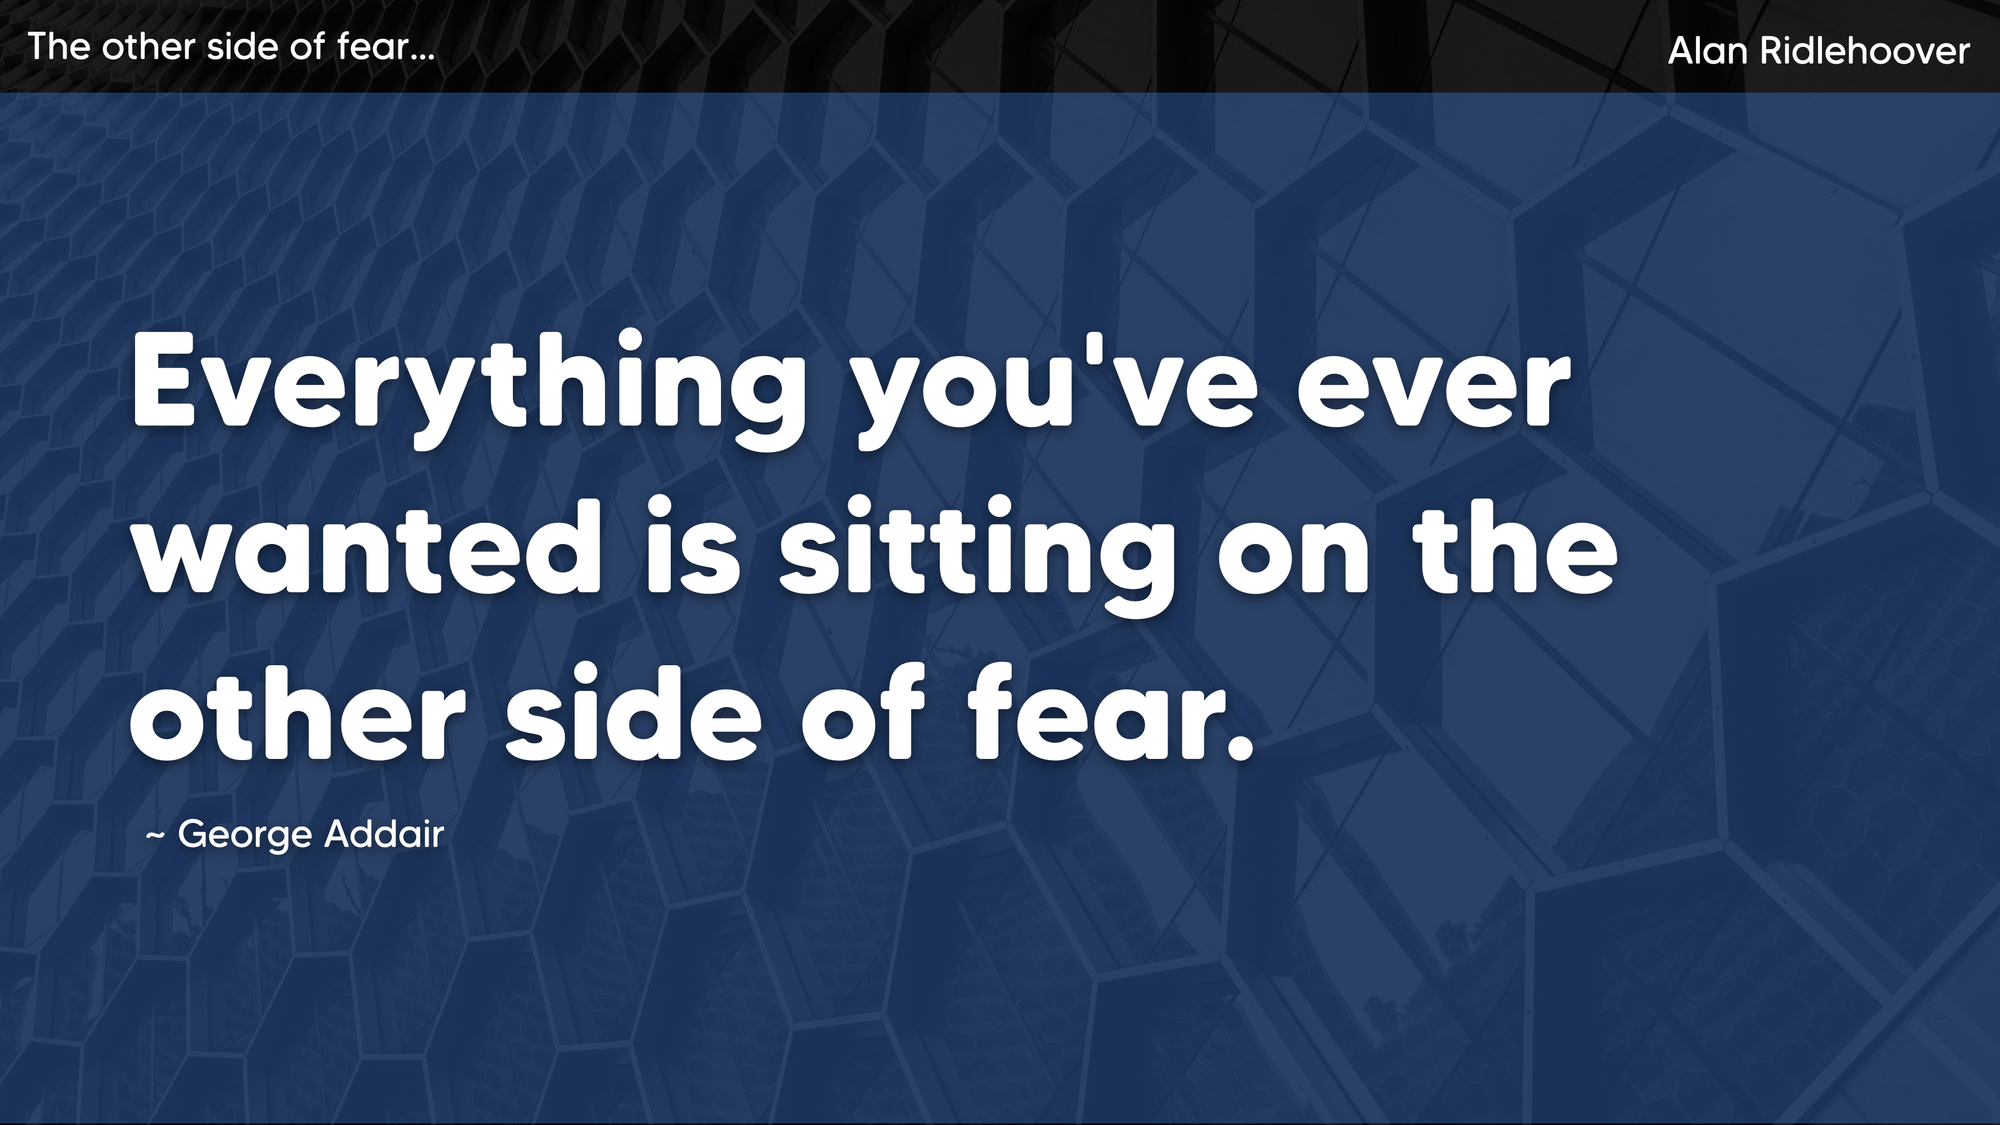 Alan Ridlehoover's Leadership Deck - The other side of fear quote slide